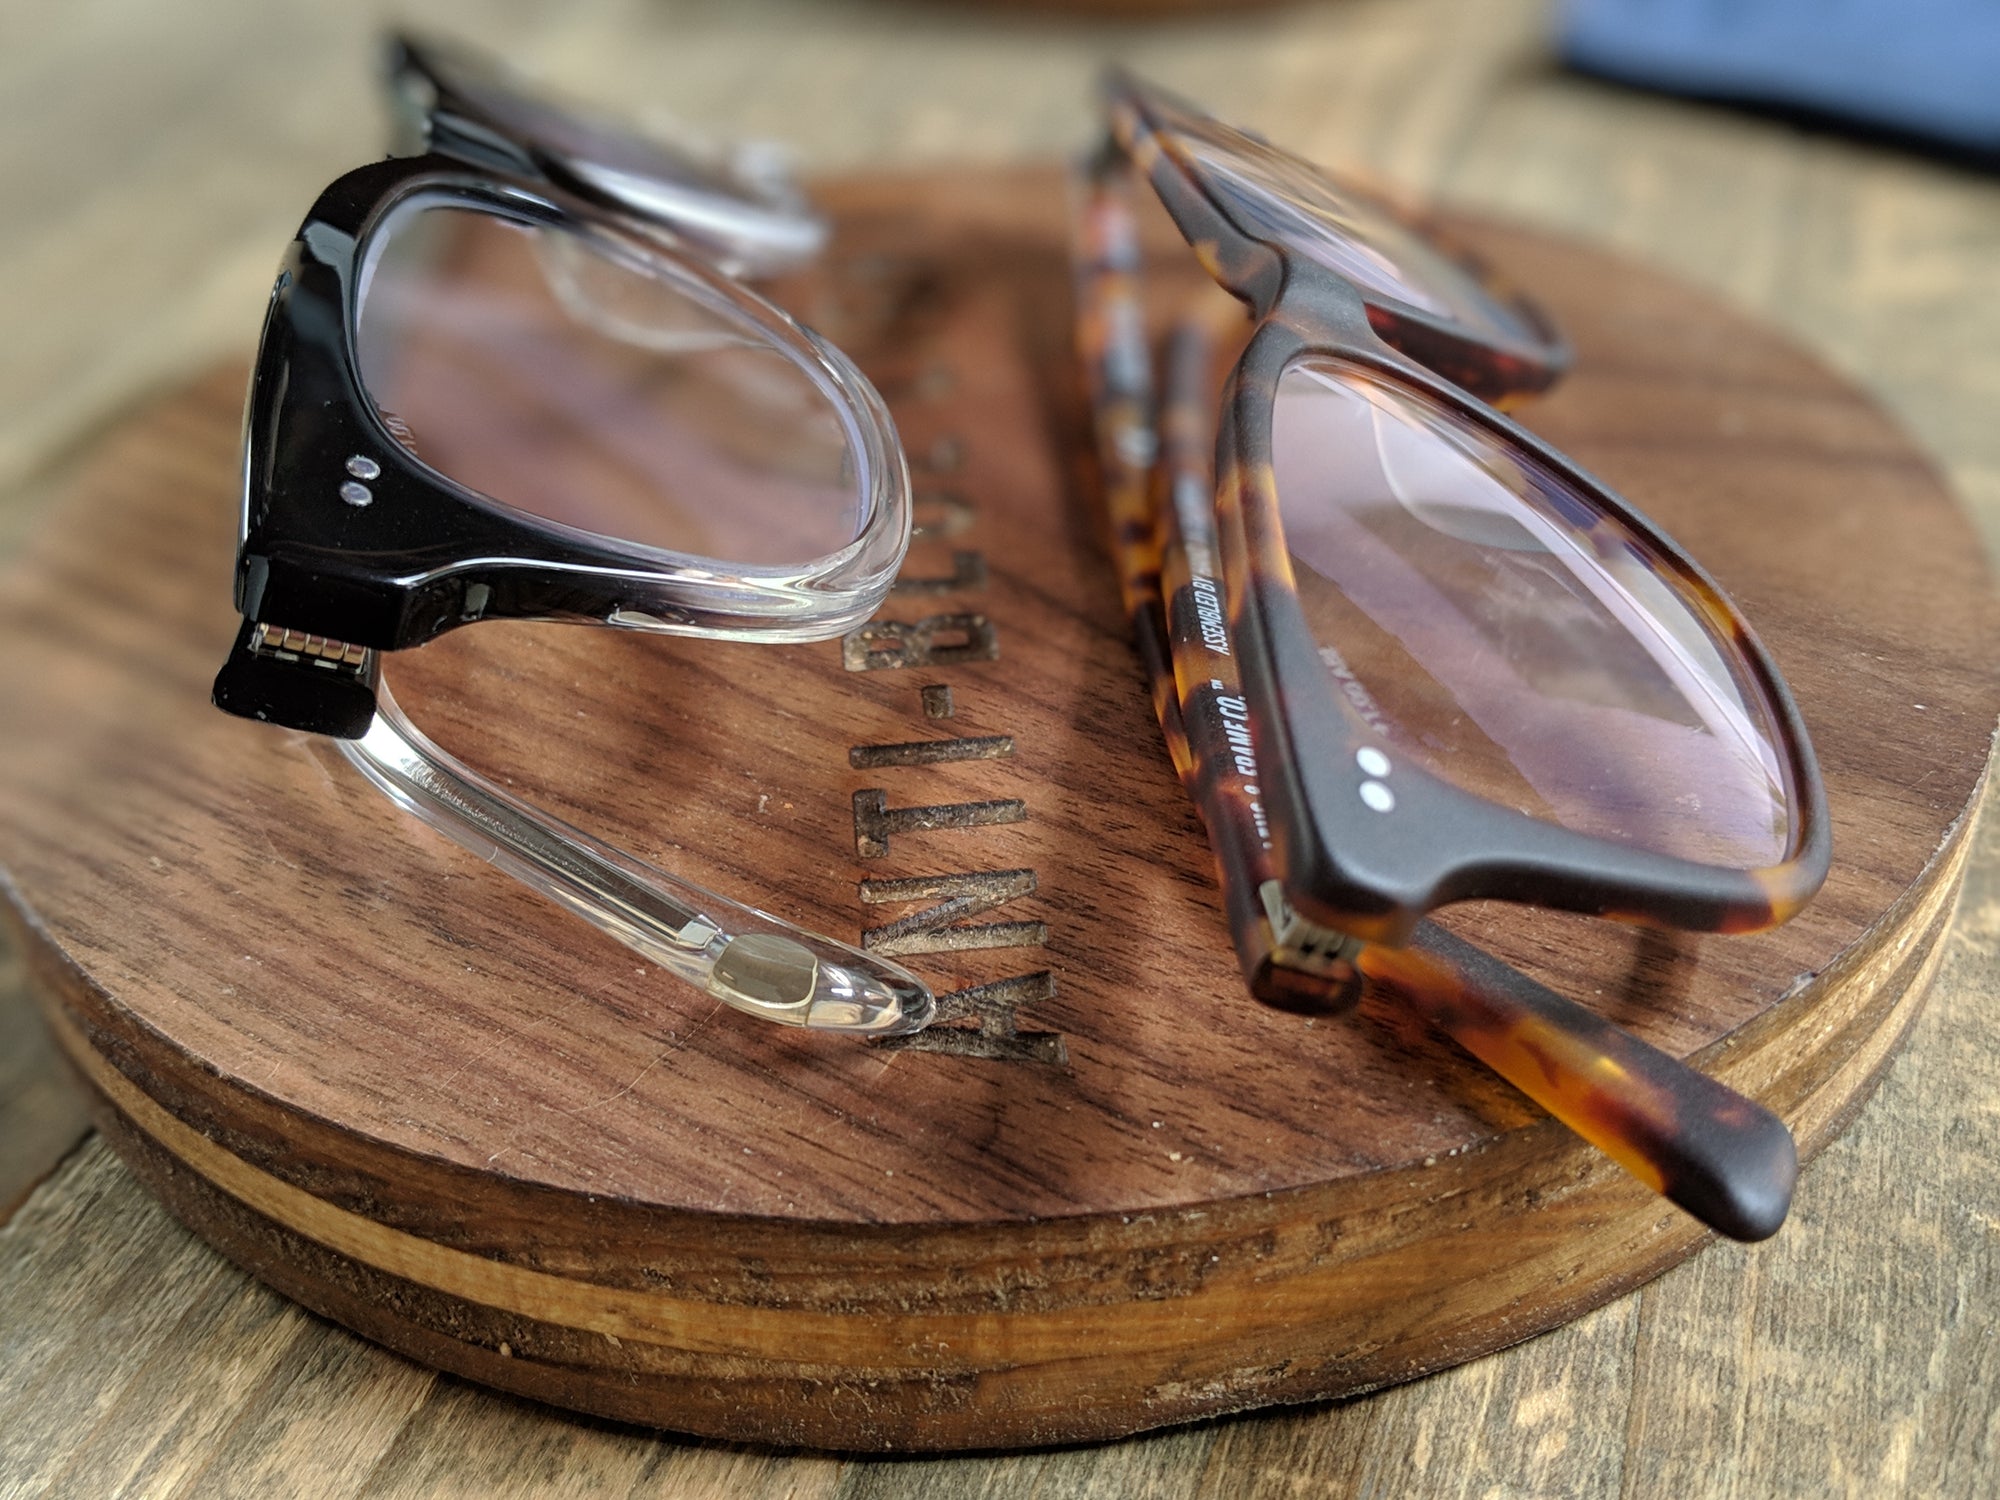 Lens & Frame Co. Launches with Focus On Disrupting The Luxury Eyewear Market